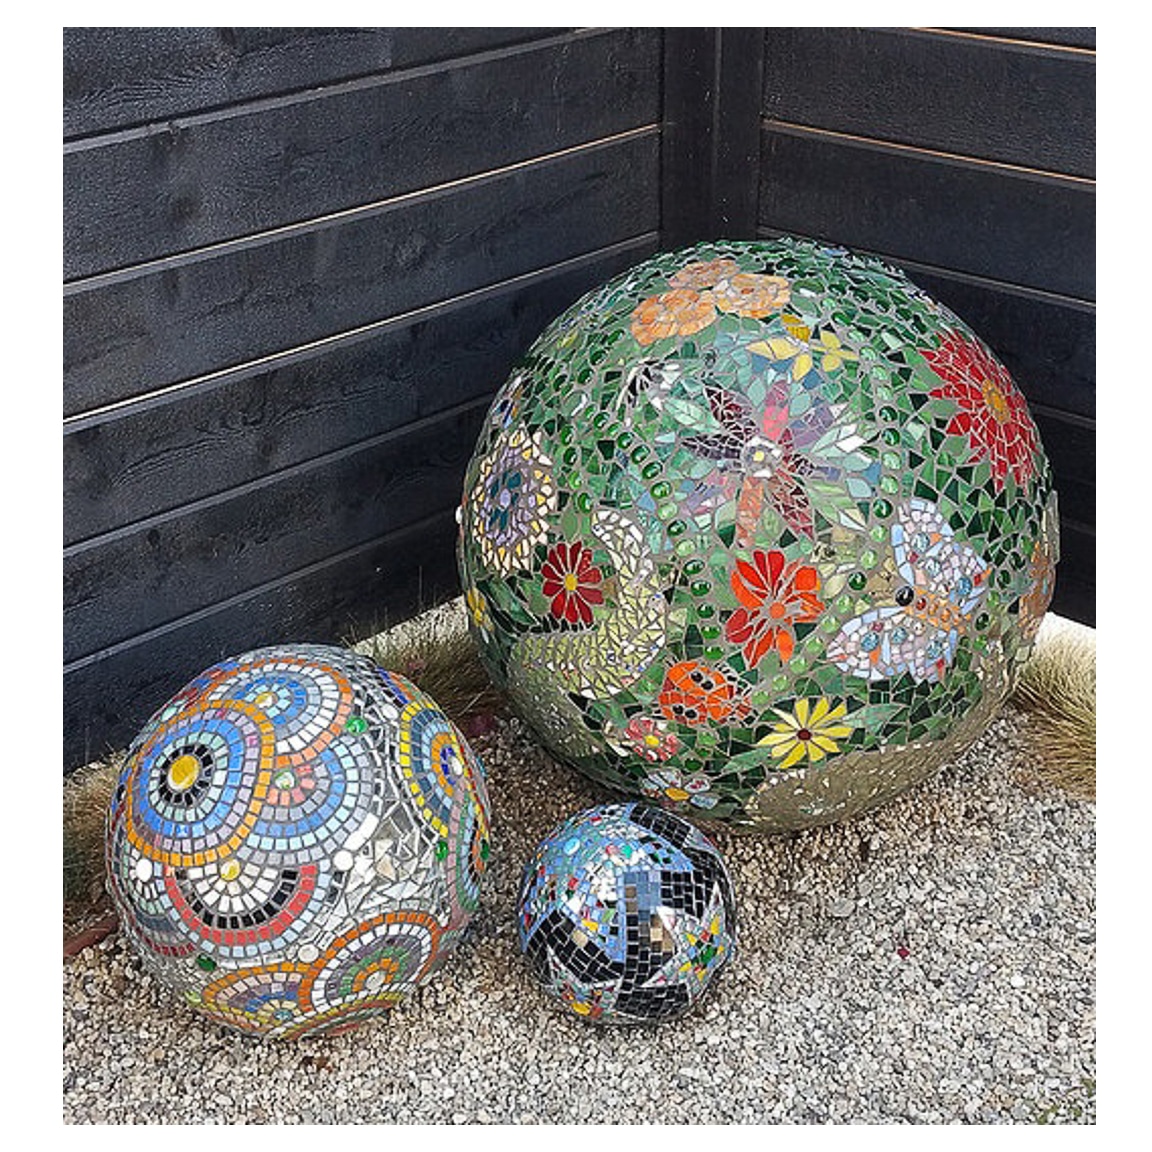 Piece By Piece Los Angeles Mosaic Spheres ig